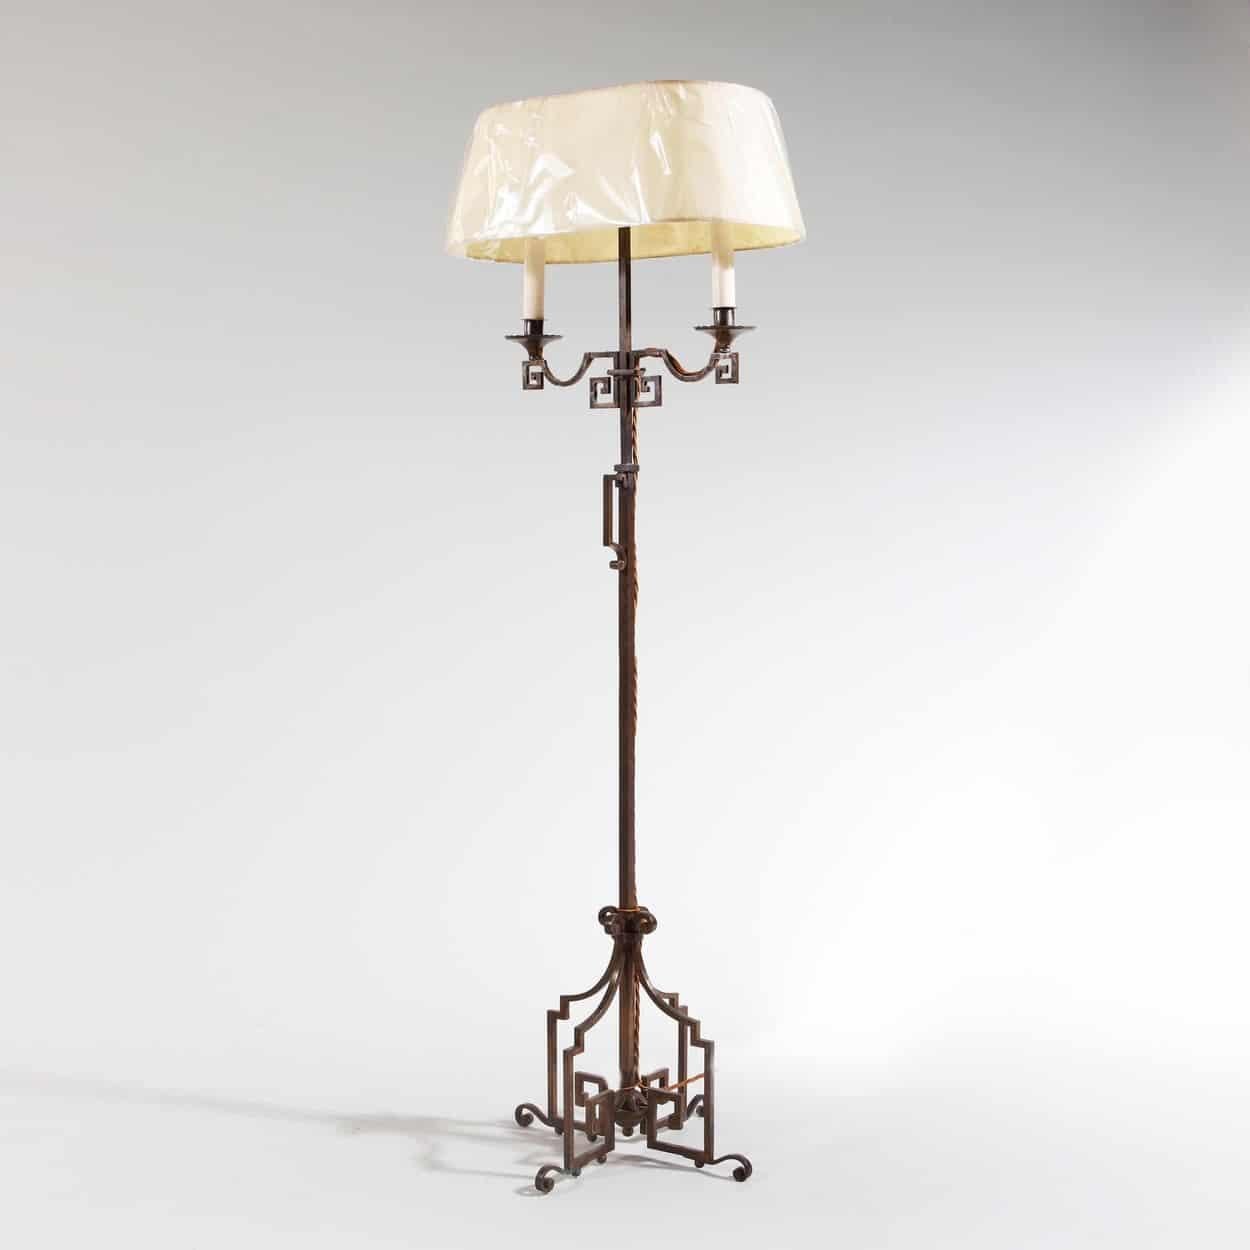 A patinated steel floor standing bouillotte lamp, the base is constructed of four facing key scrolls with foliate enrichments supporting a central stem with a carrying handle and with an adjustable height two branch shaded light above also employing